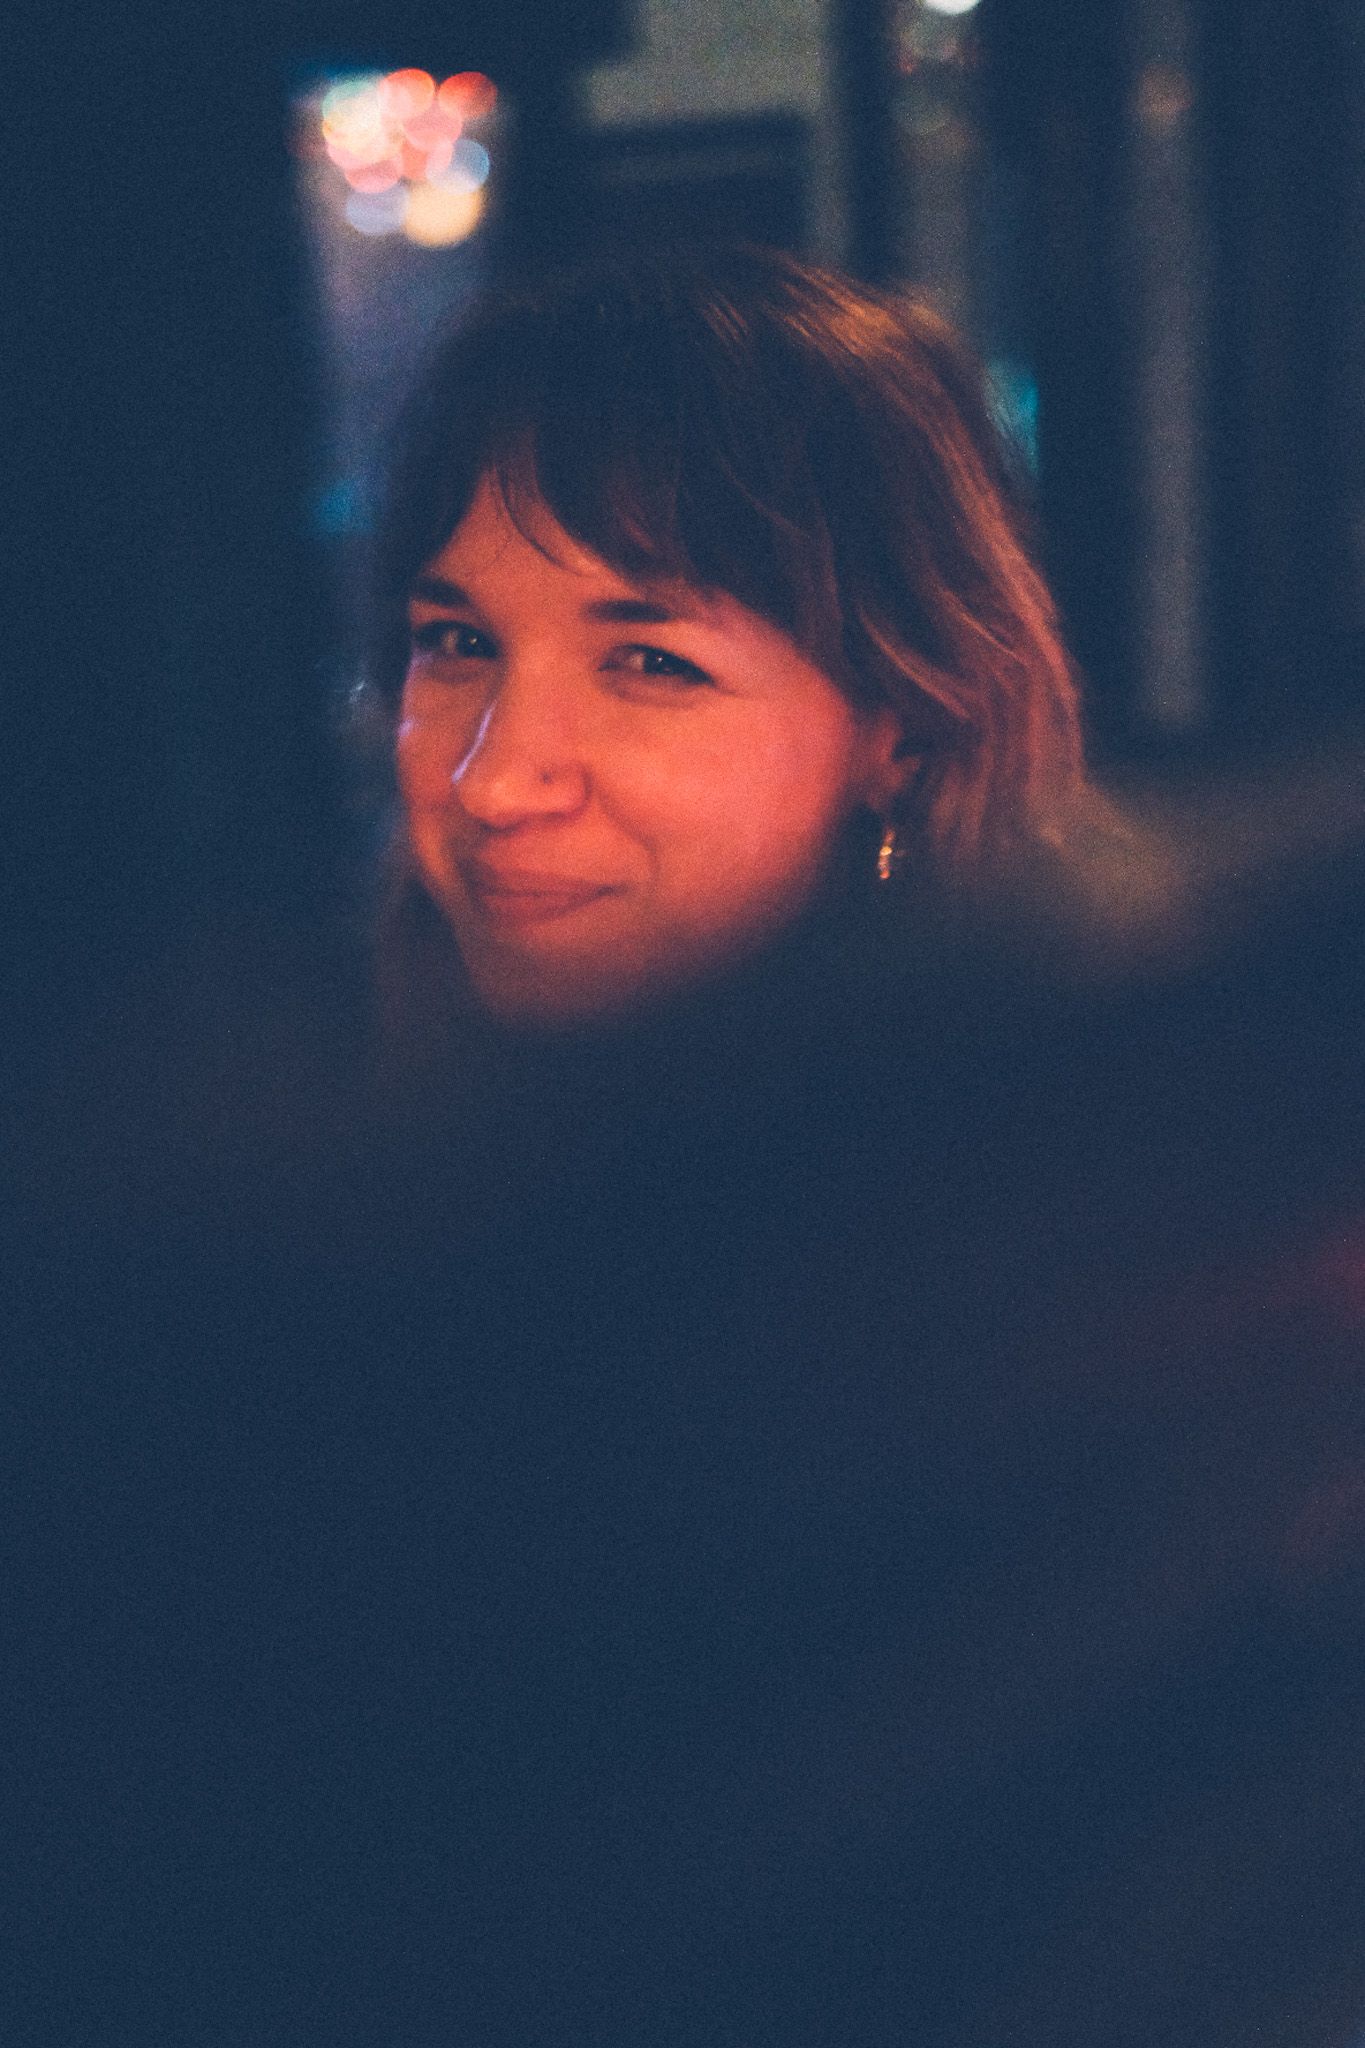 A woman, cast in warm, low light, smiles at the camera. Her lower half below her head is cut off by a dark object in the foreground.